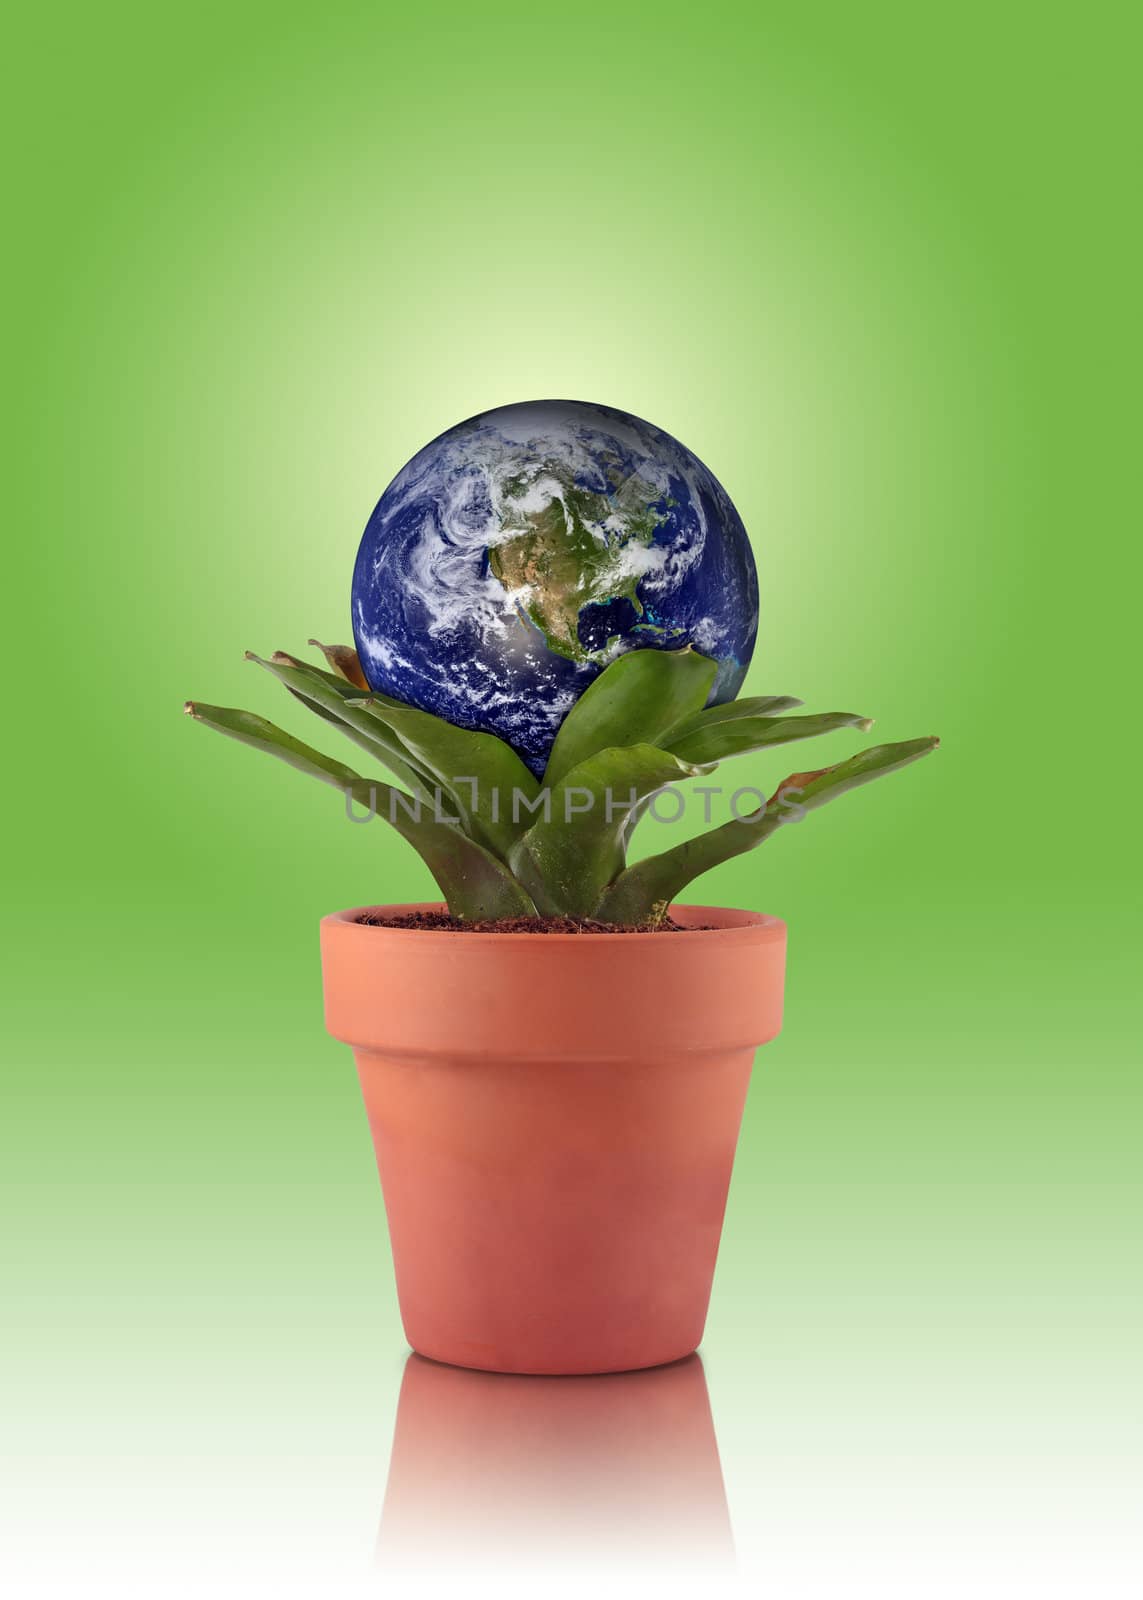 A flower pot with a green bromeliad plant that has the planet earth resting within it.